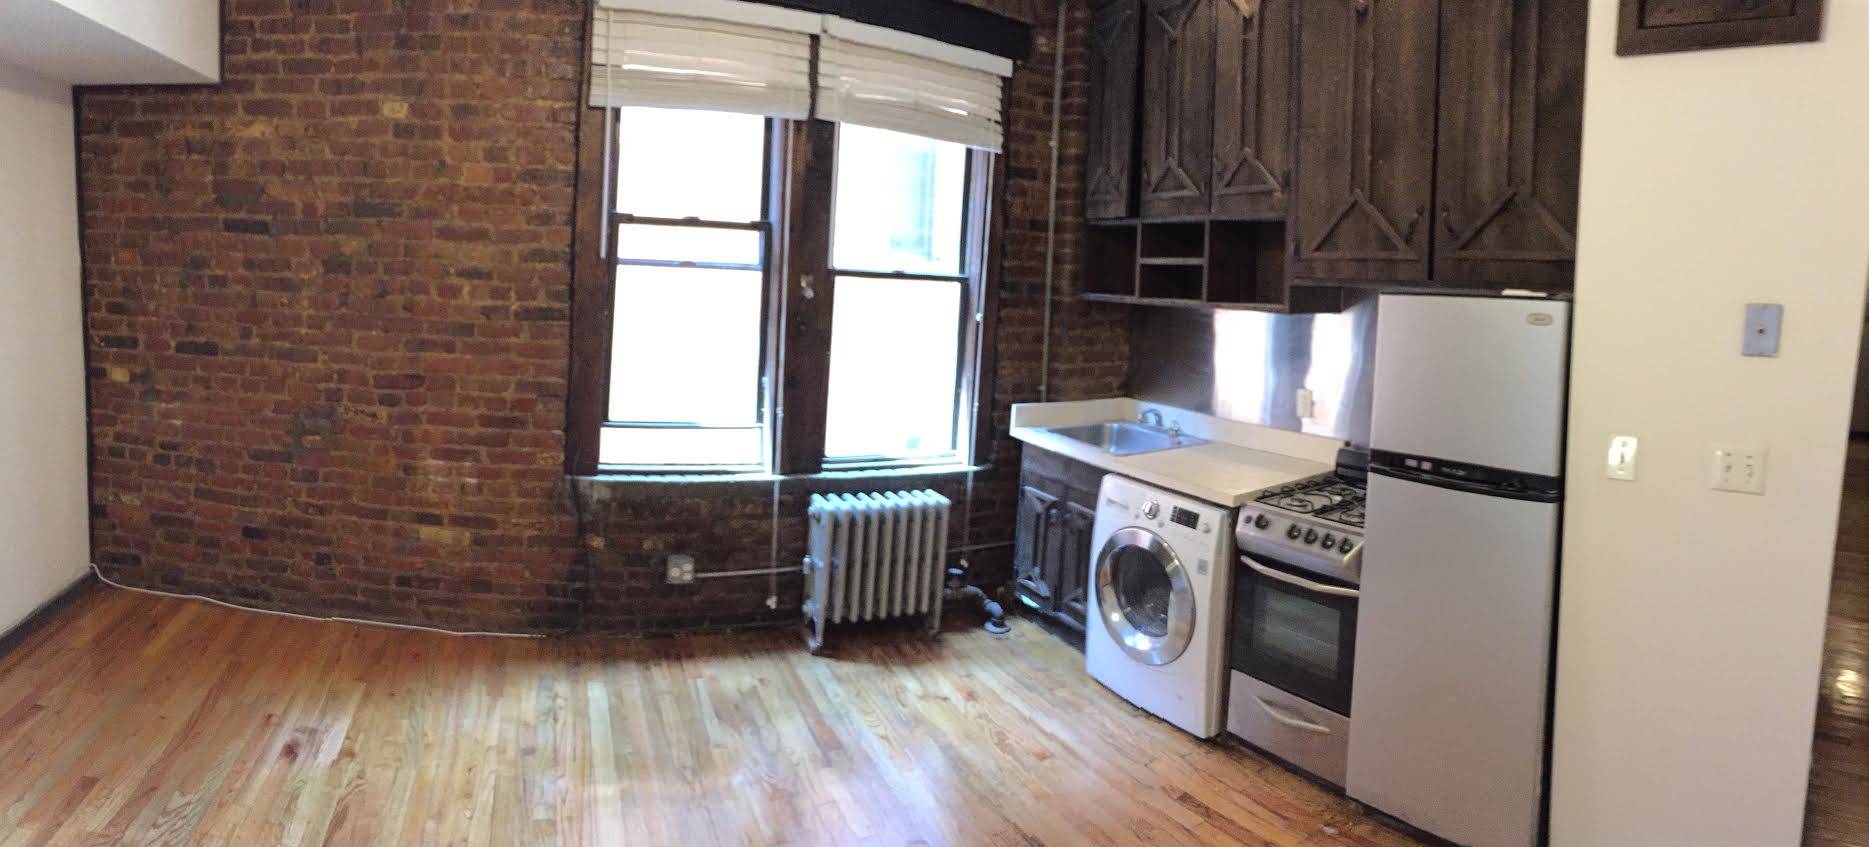 East Village: 3 Bedroom with Washer/Dryer in Unit Available June 1st